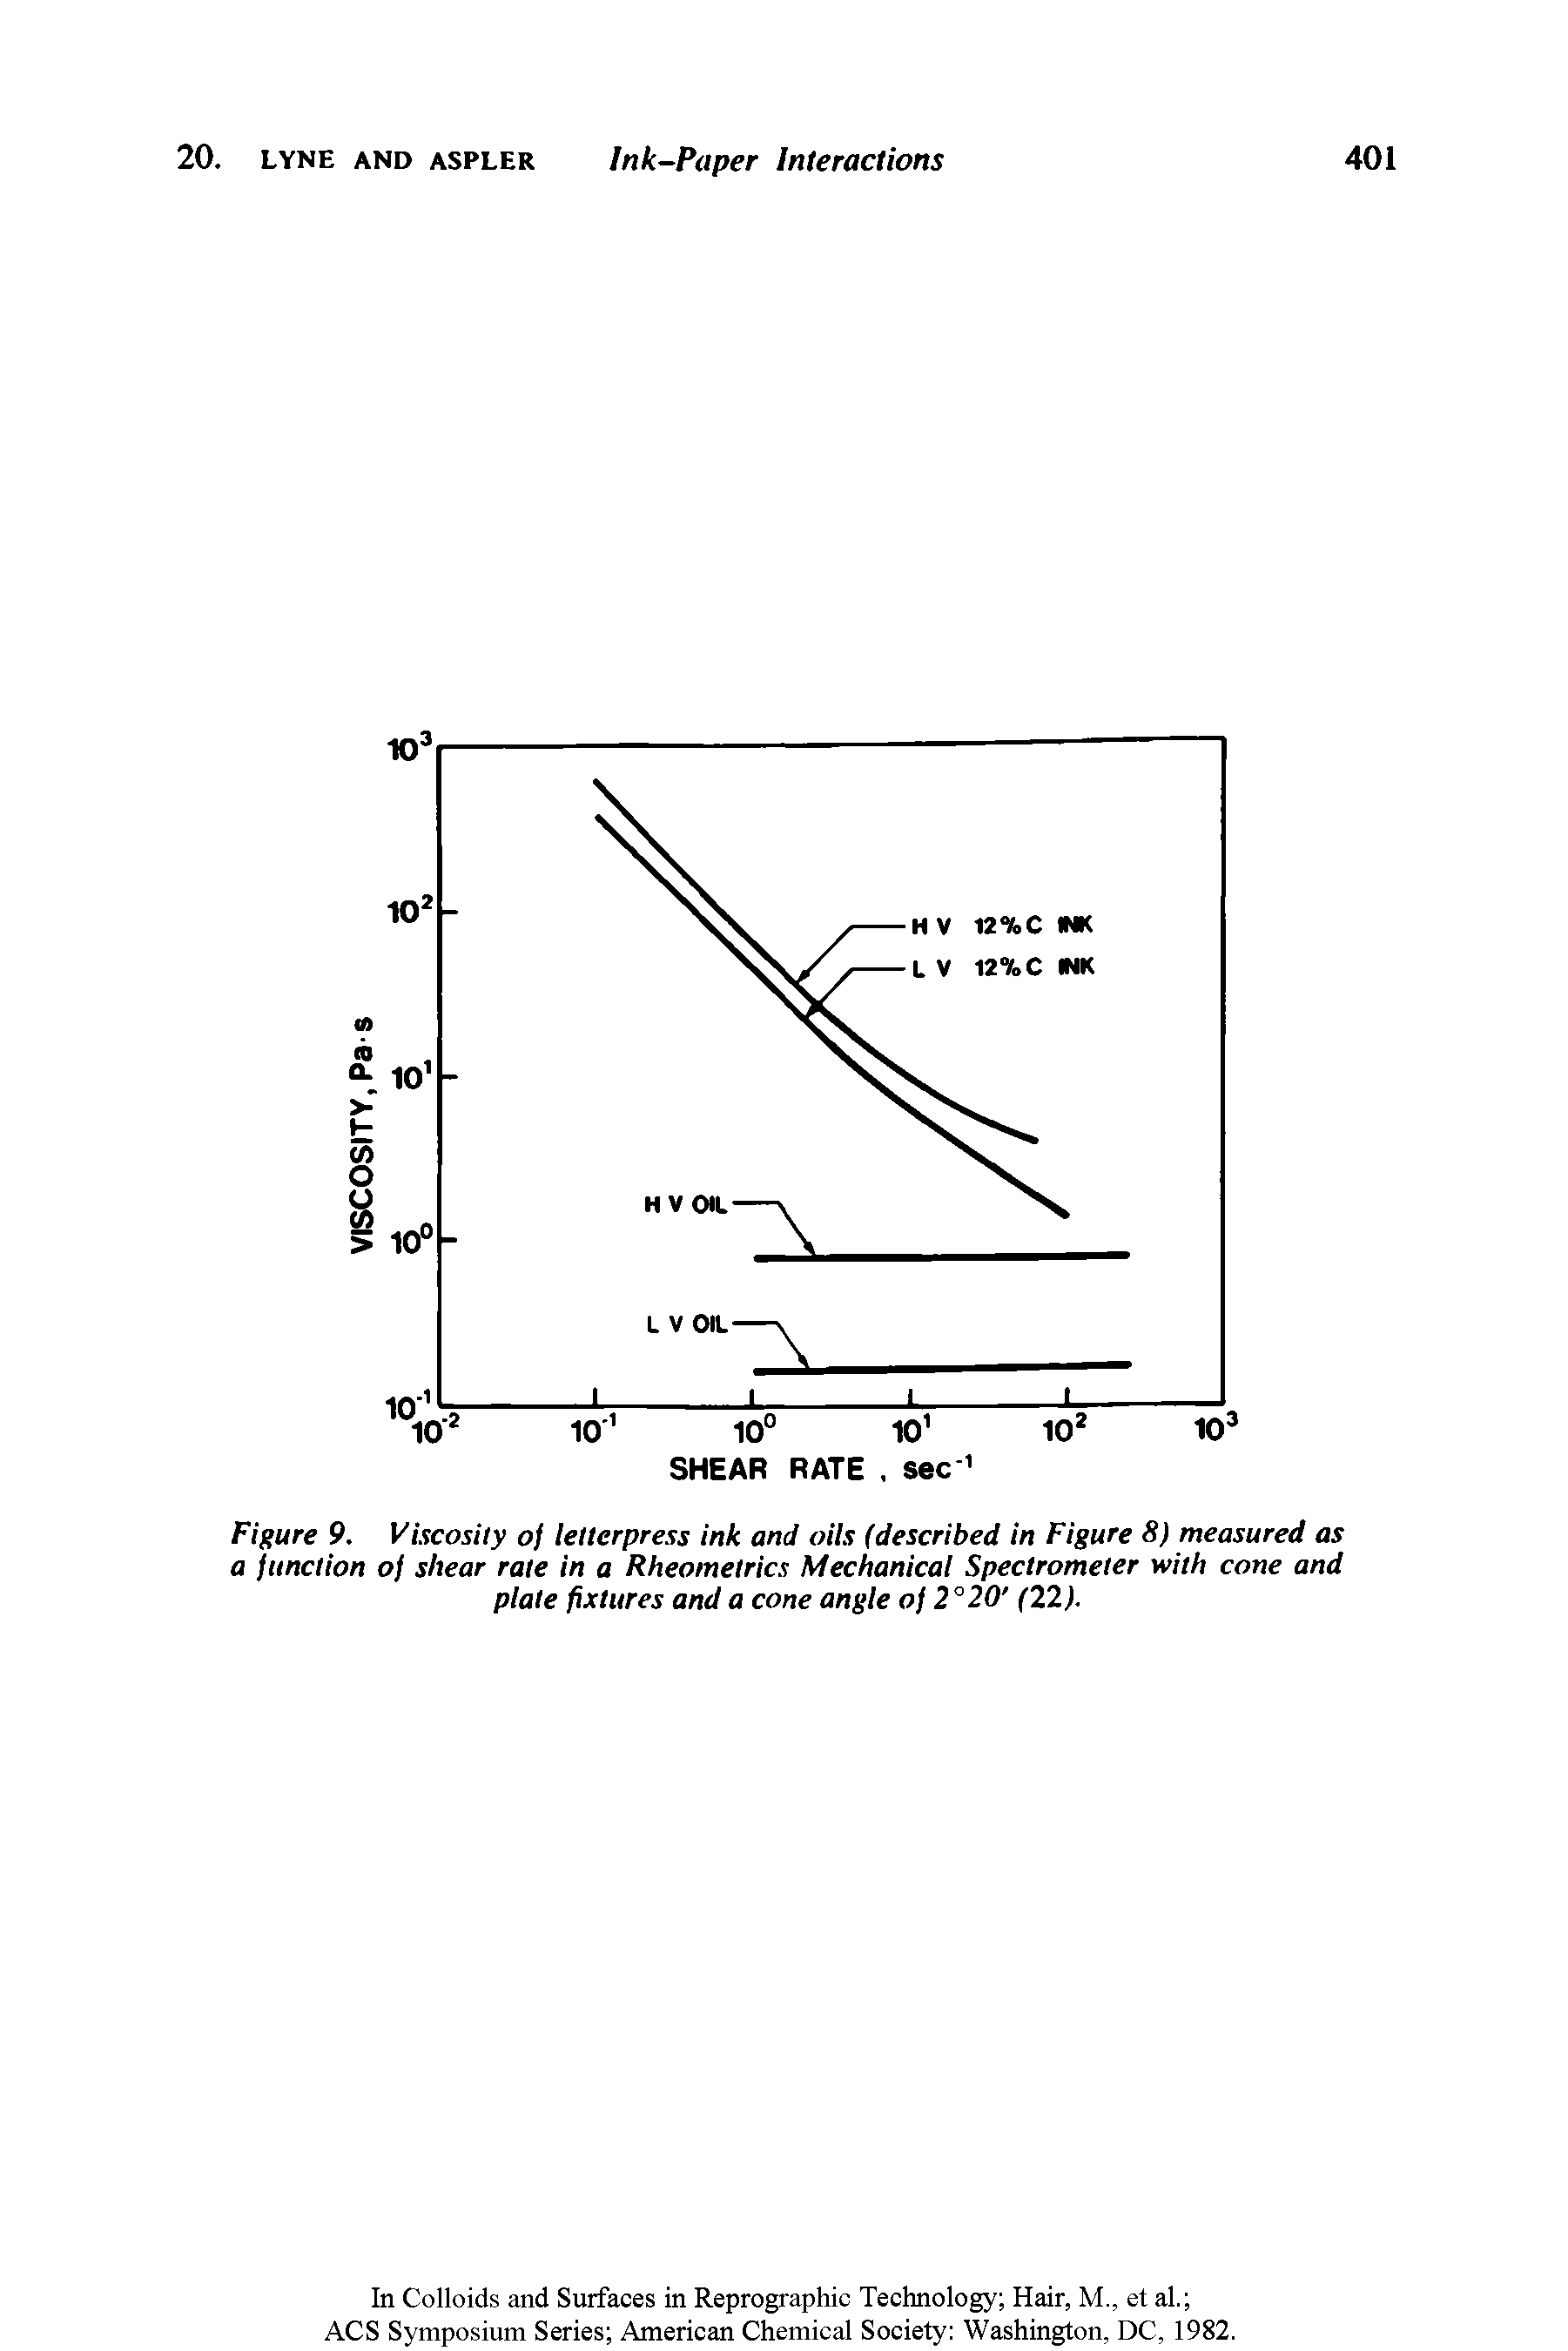 Figure 9. Viscosity of letterpress ink and oils (described in Figure 8) measured as a function of shear rate in a Rheometrics Mechanical Spectrometer with cone and plate fixtures and a cone angle of 2°20 (22).